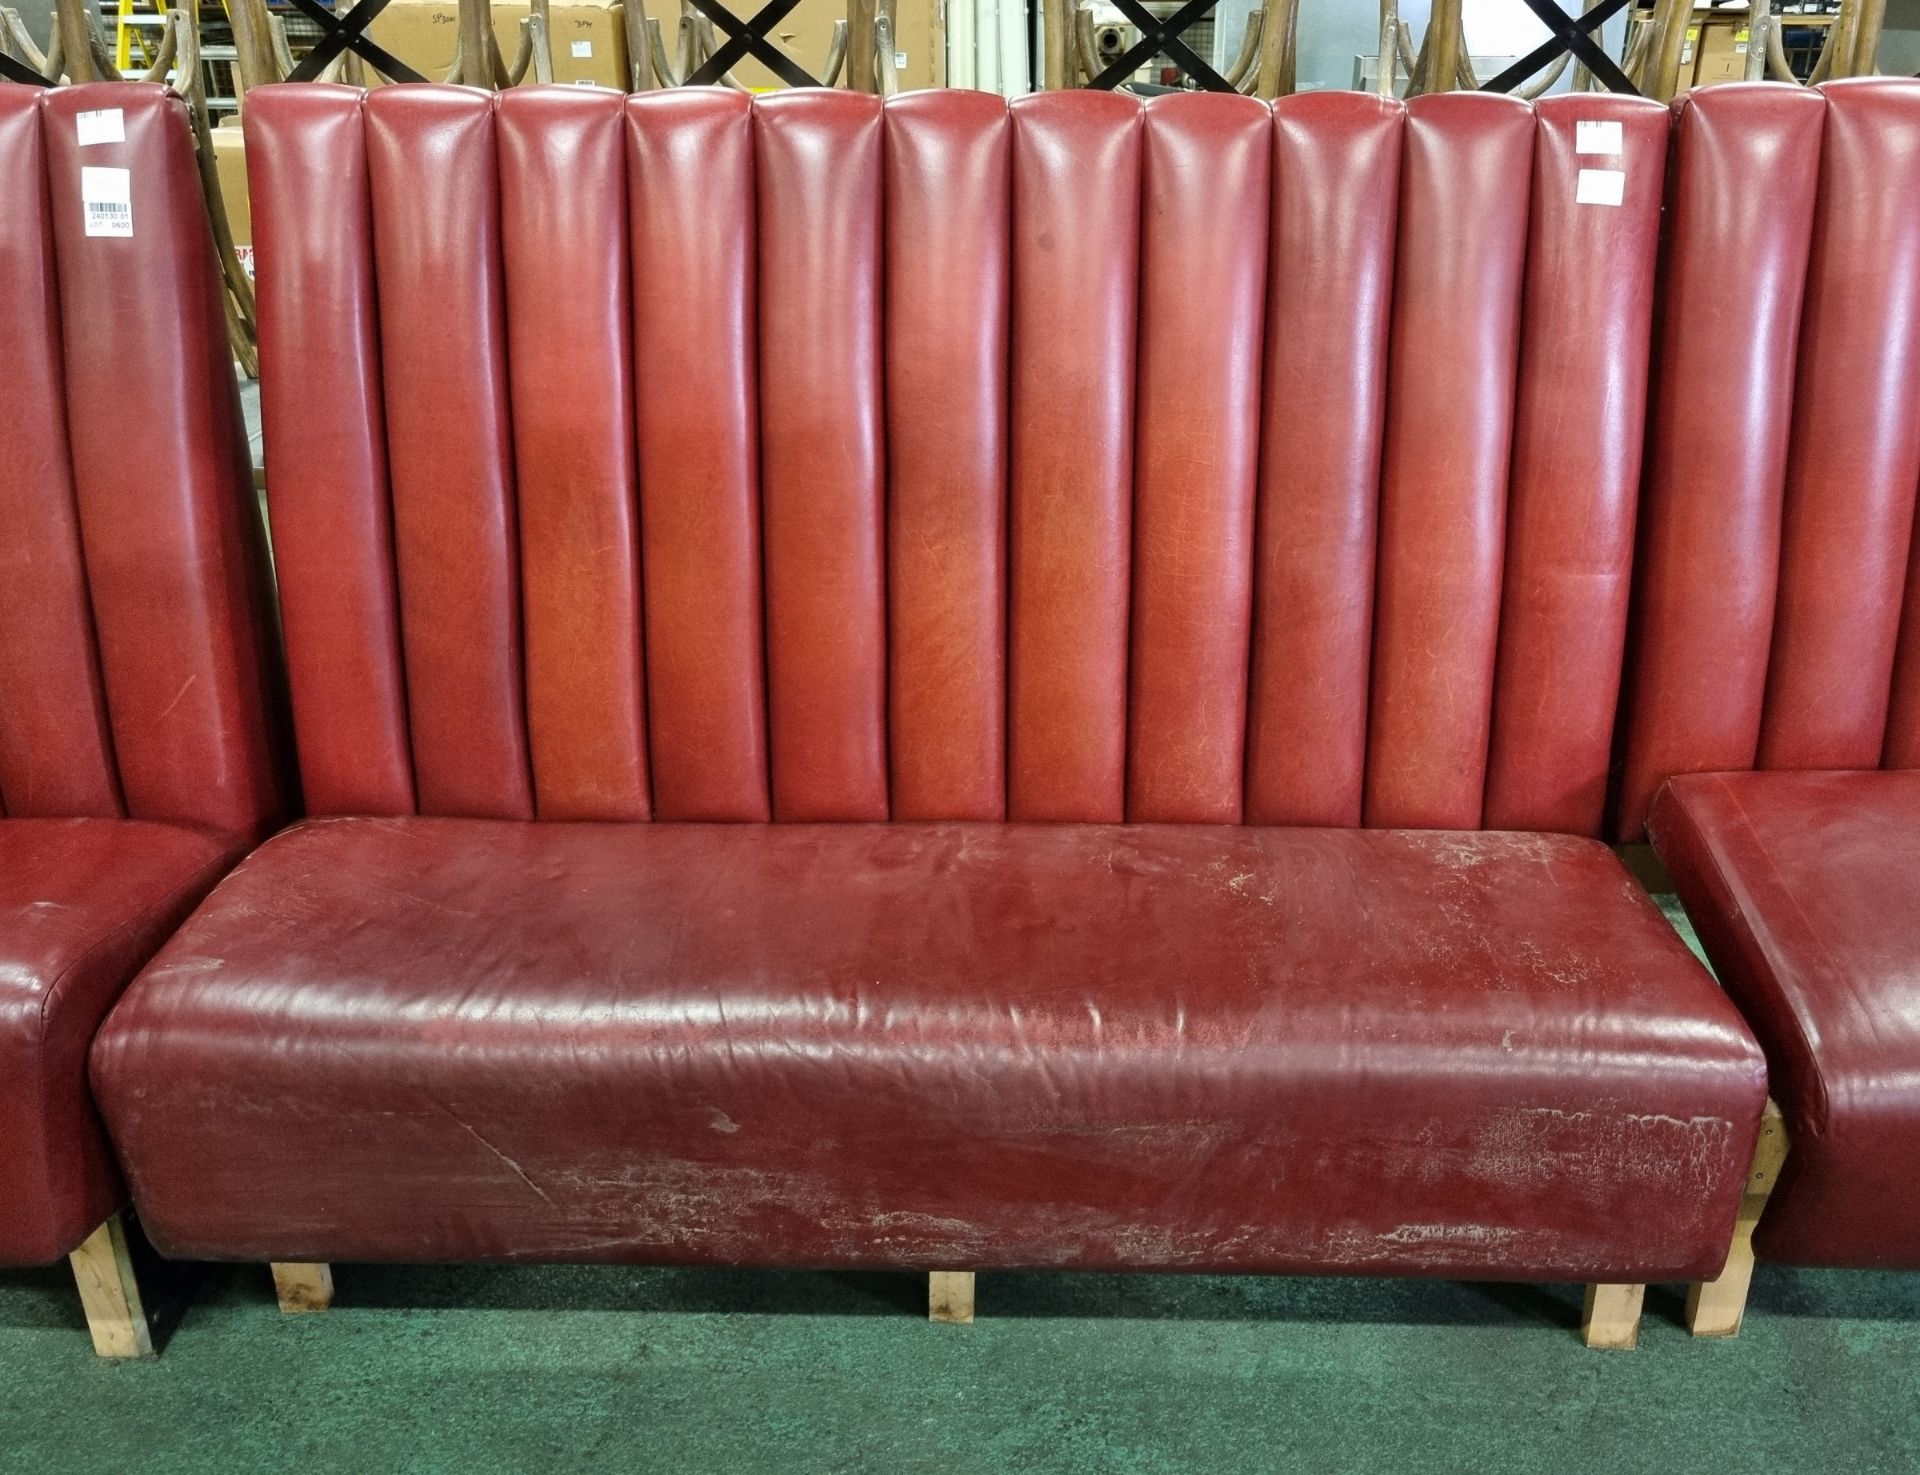 Red leather padded bench seating - Image 3 of 4